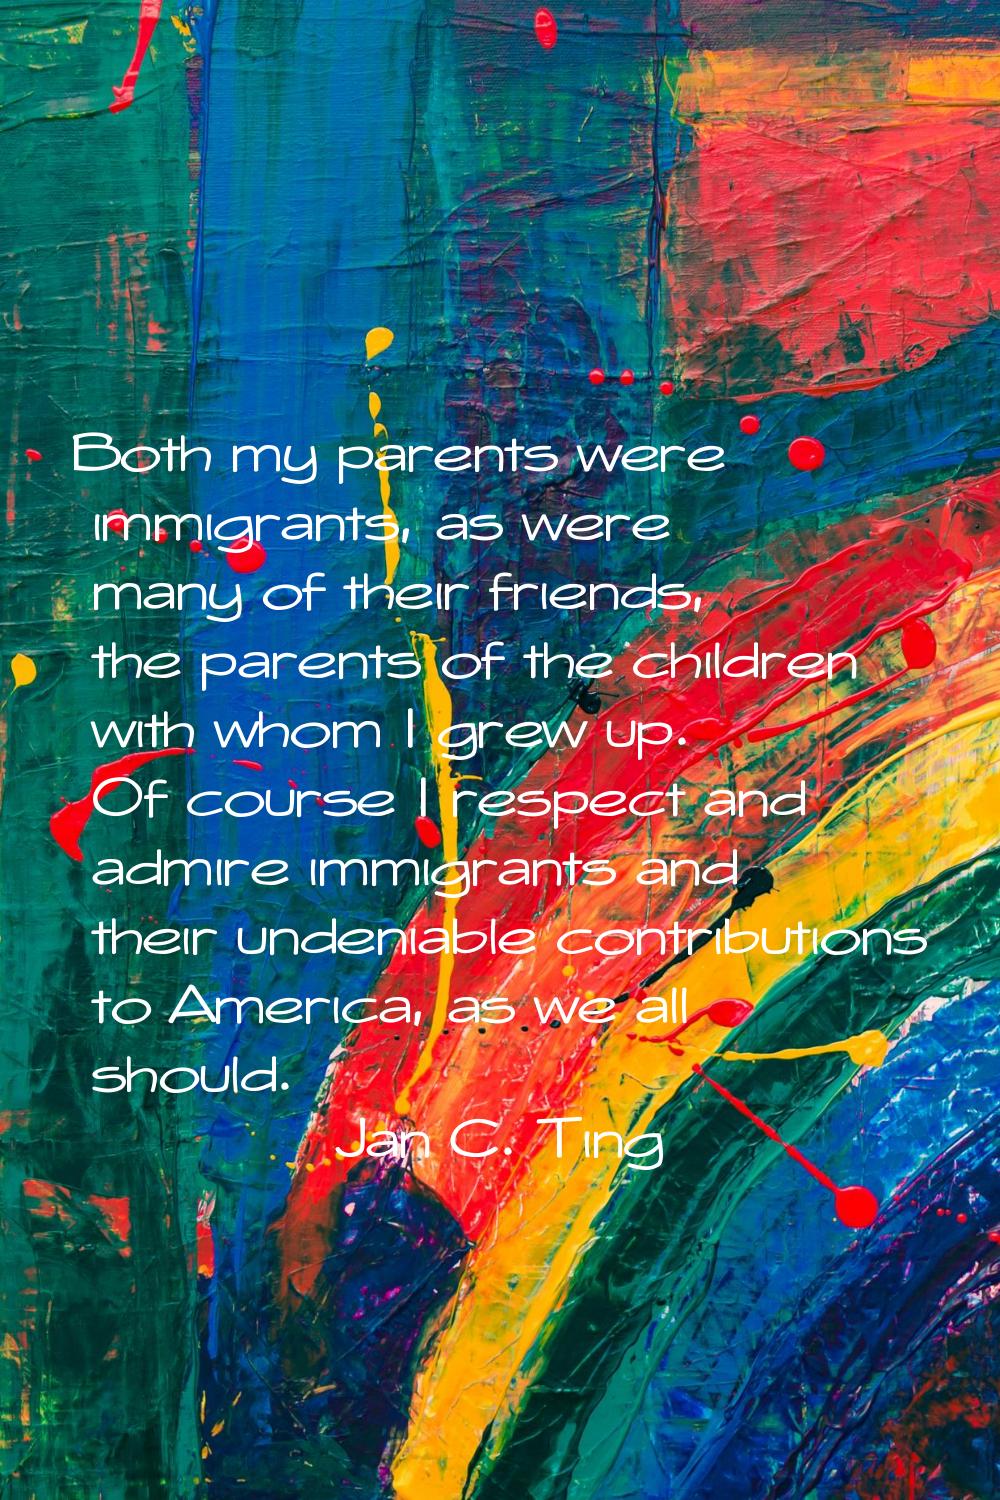 Both my parents were immigrants, as were many of their friends, the parents of the children with wh